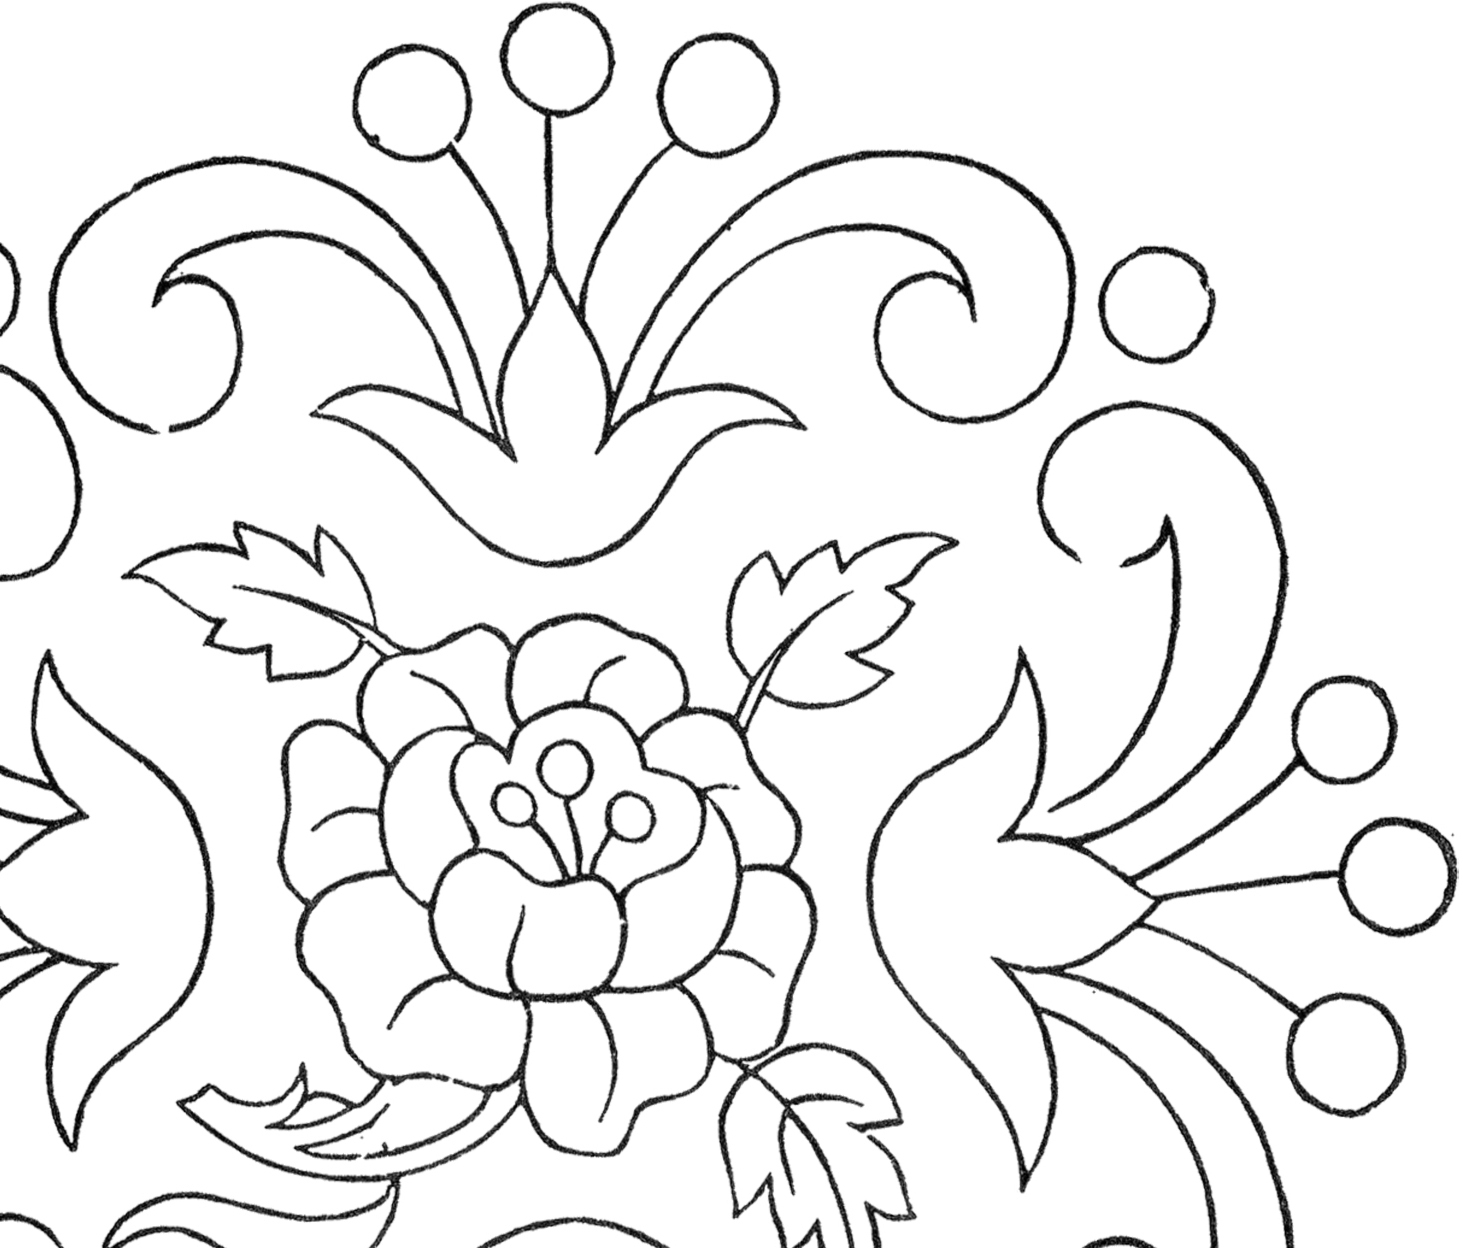 Flower Embroidery Patterns Vintage Floral Embroidery Pattern The Graphics Fairy